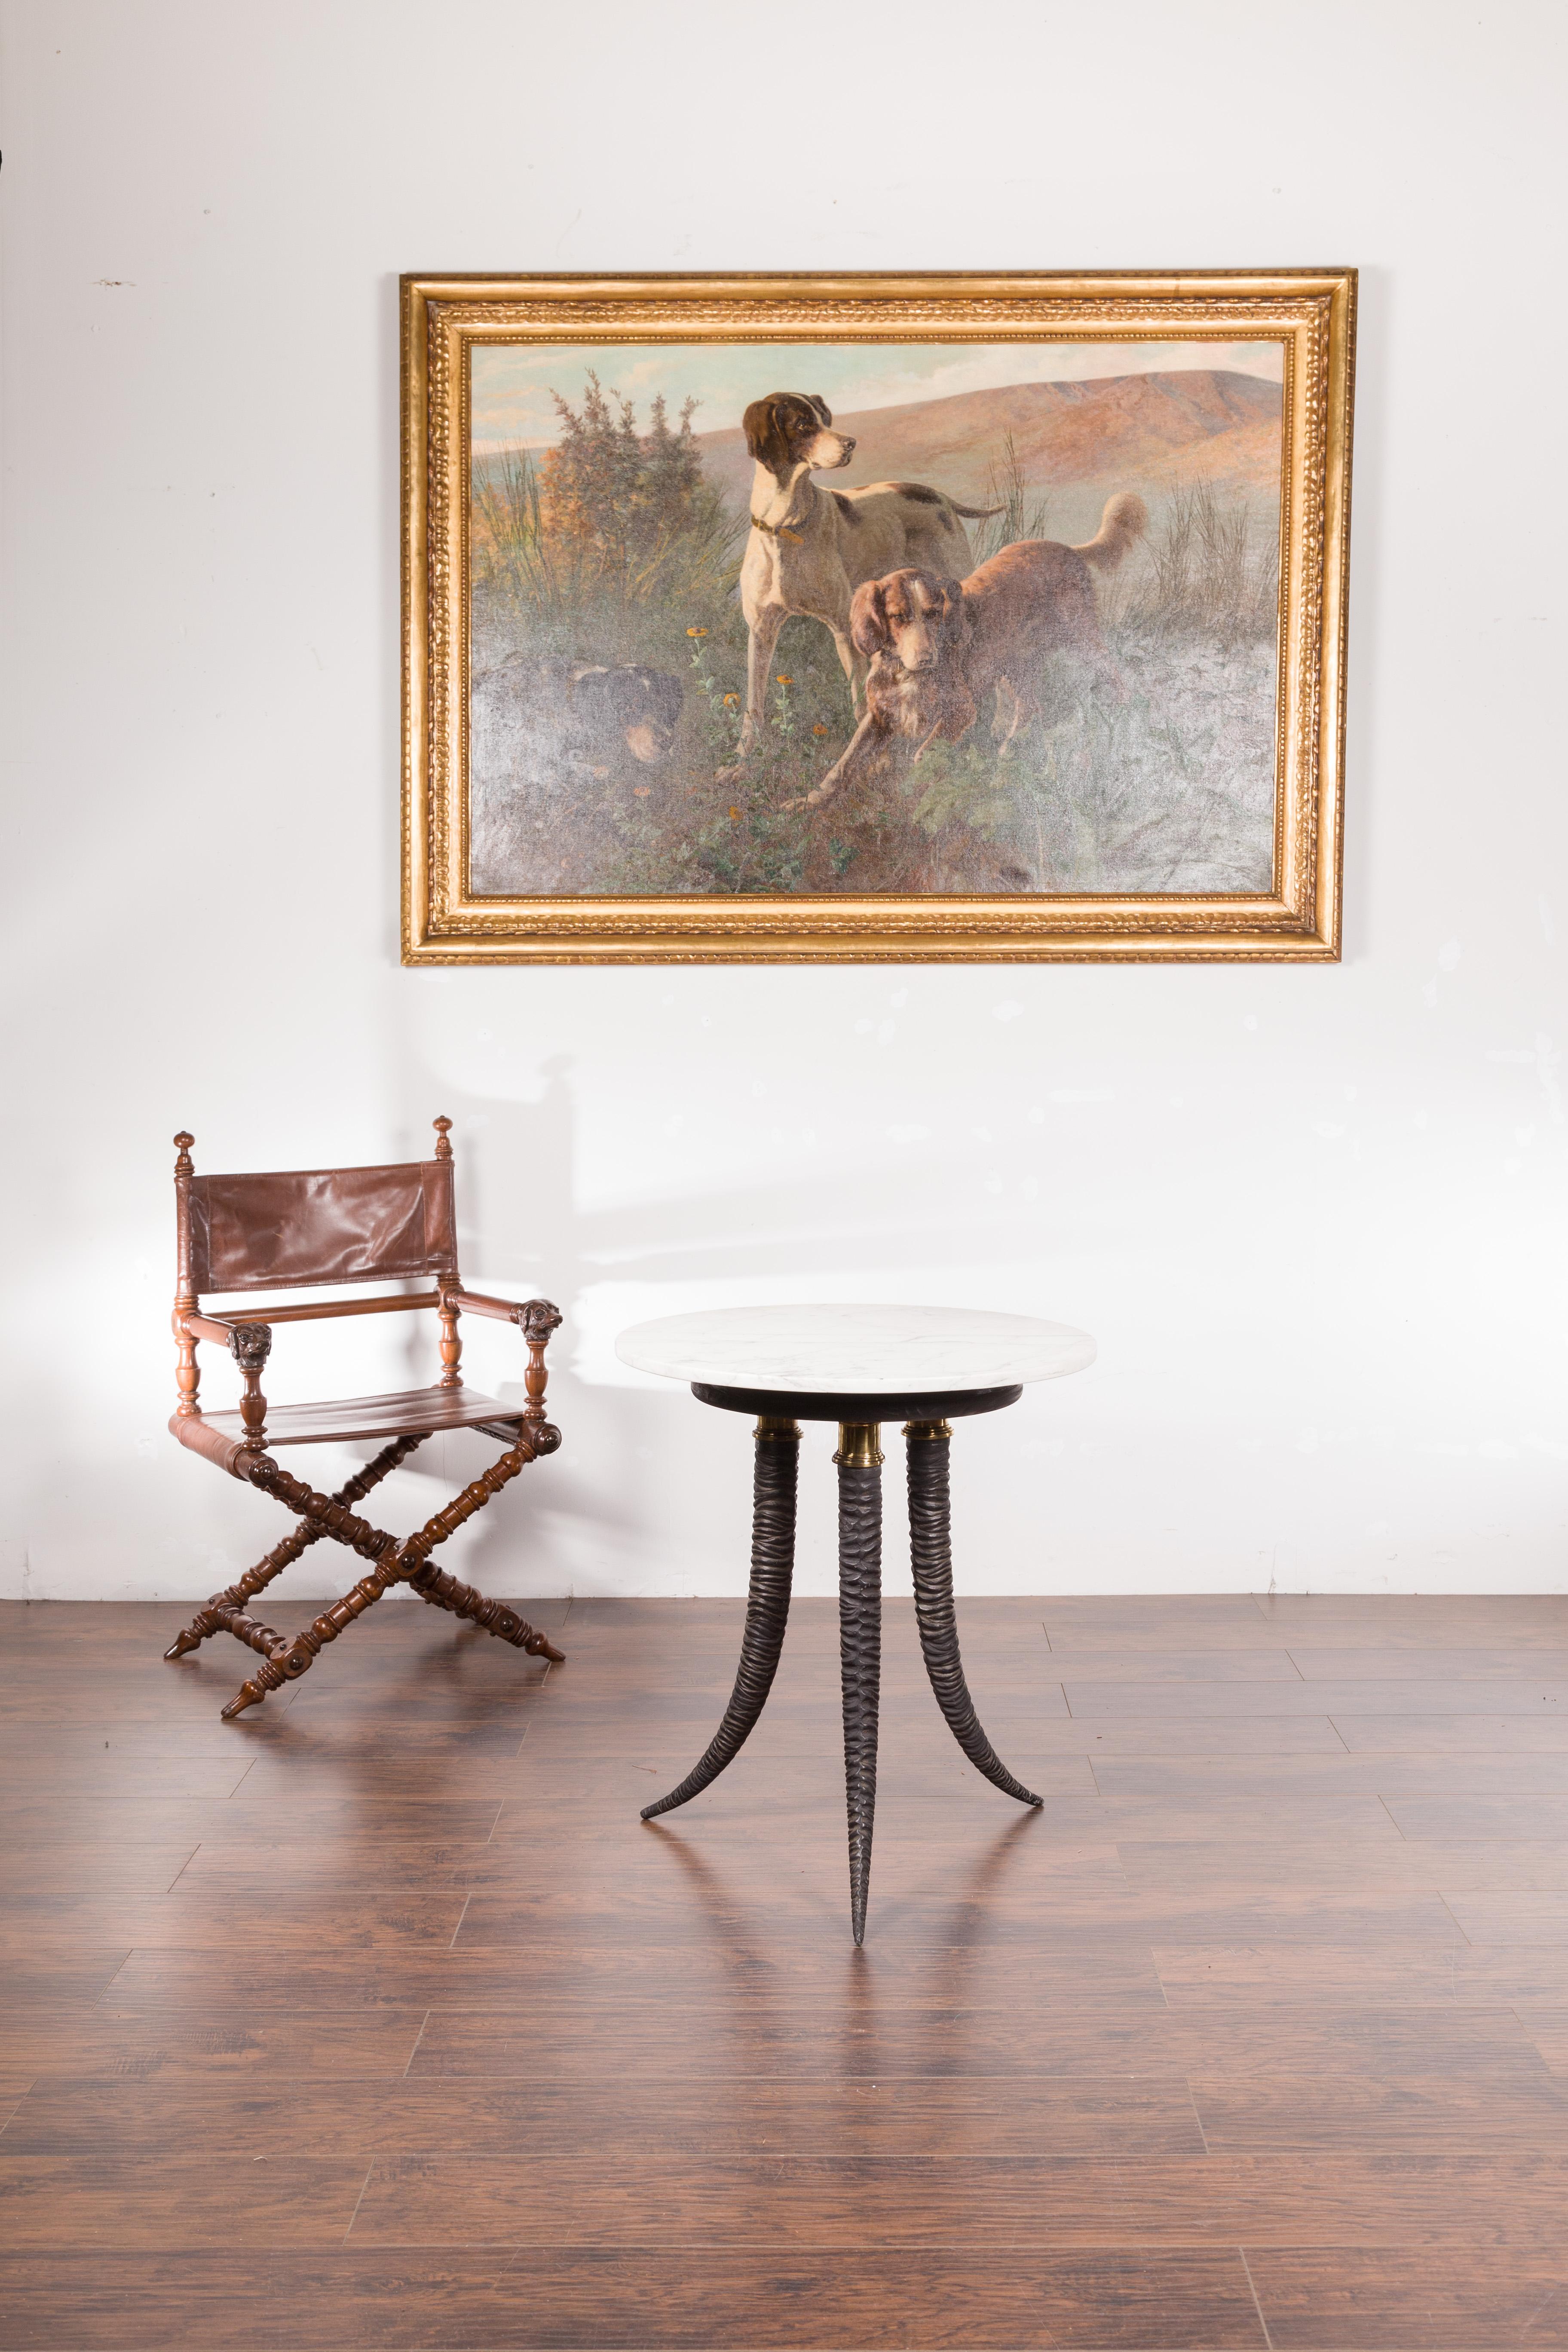 An Italian metal side table from the mid-20th century, with horn style base and white marble top. Created in Italy during the midcentury period, this side table immediately attracts our attention with its tripod Horn style base, supporting a